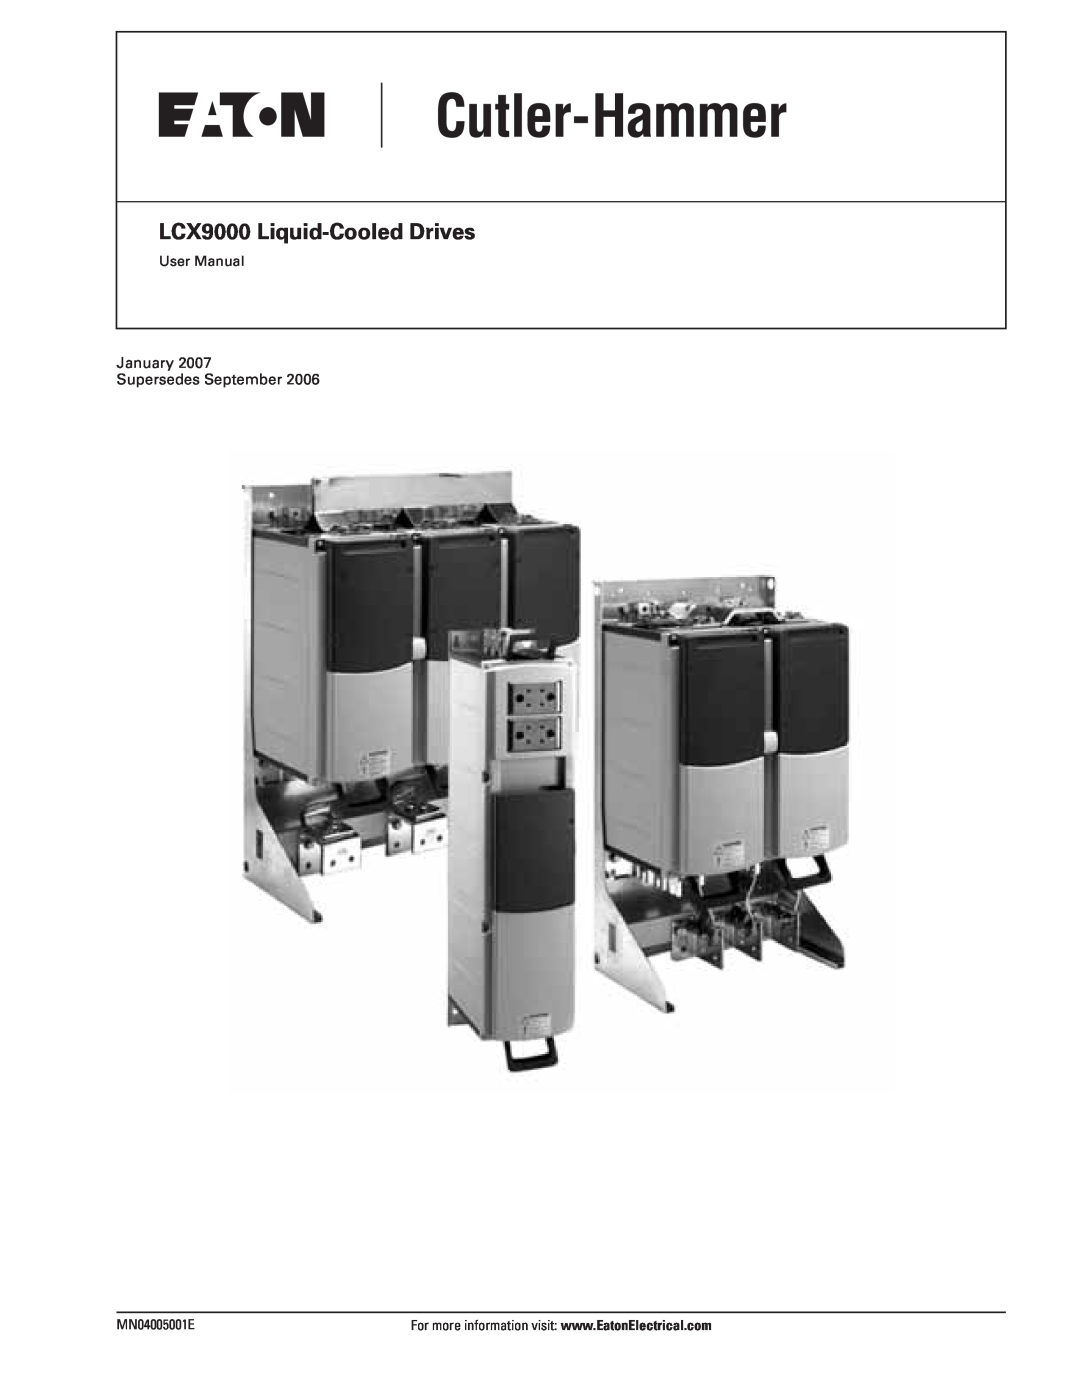 J. T. Eaton user manual LCX9000 Liquid-Cooled Drives, User Manual January Supersedes September, MN04005001E 